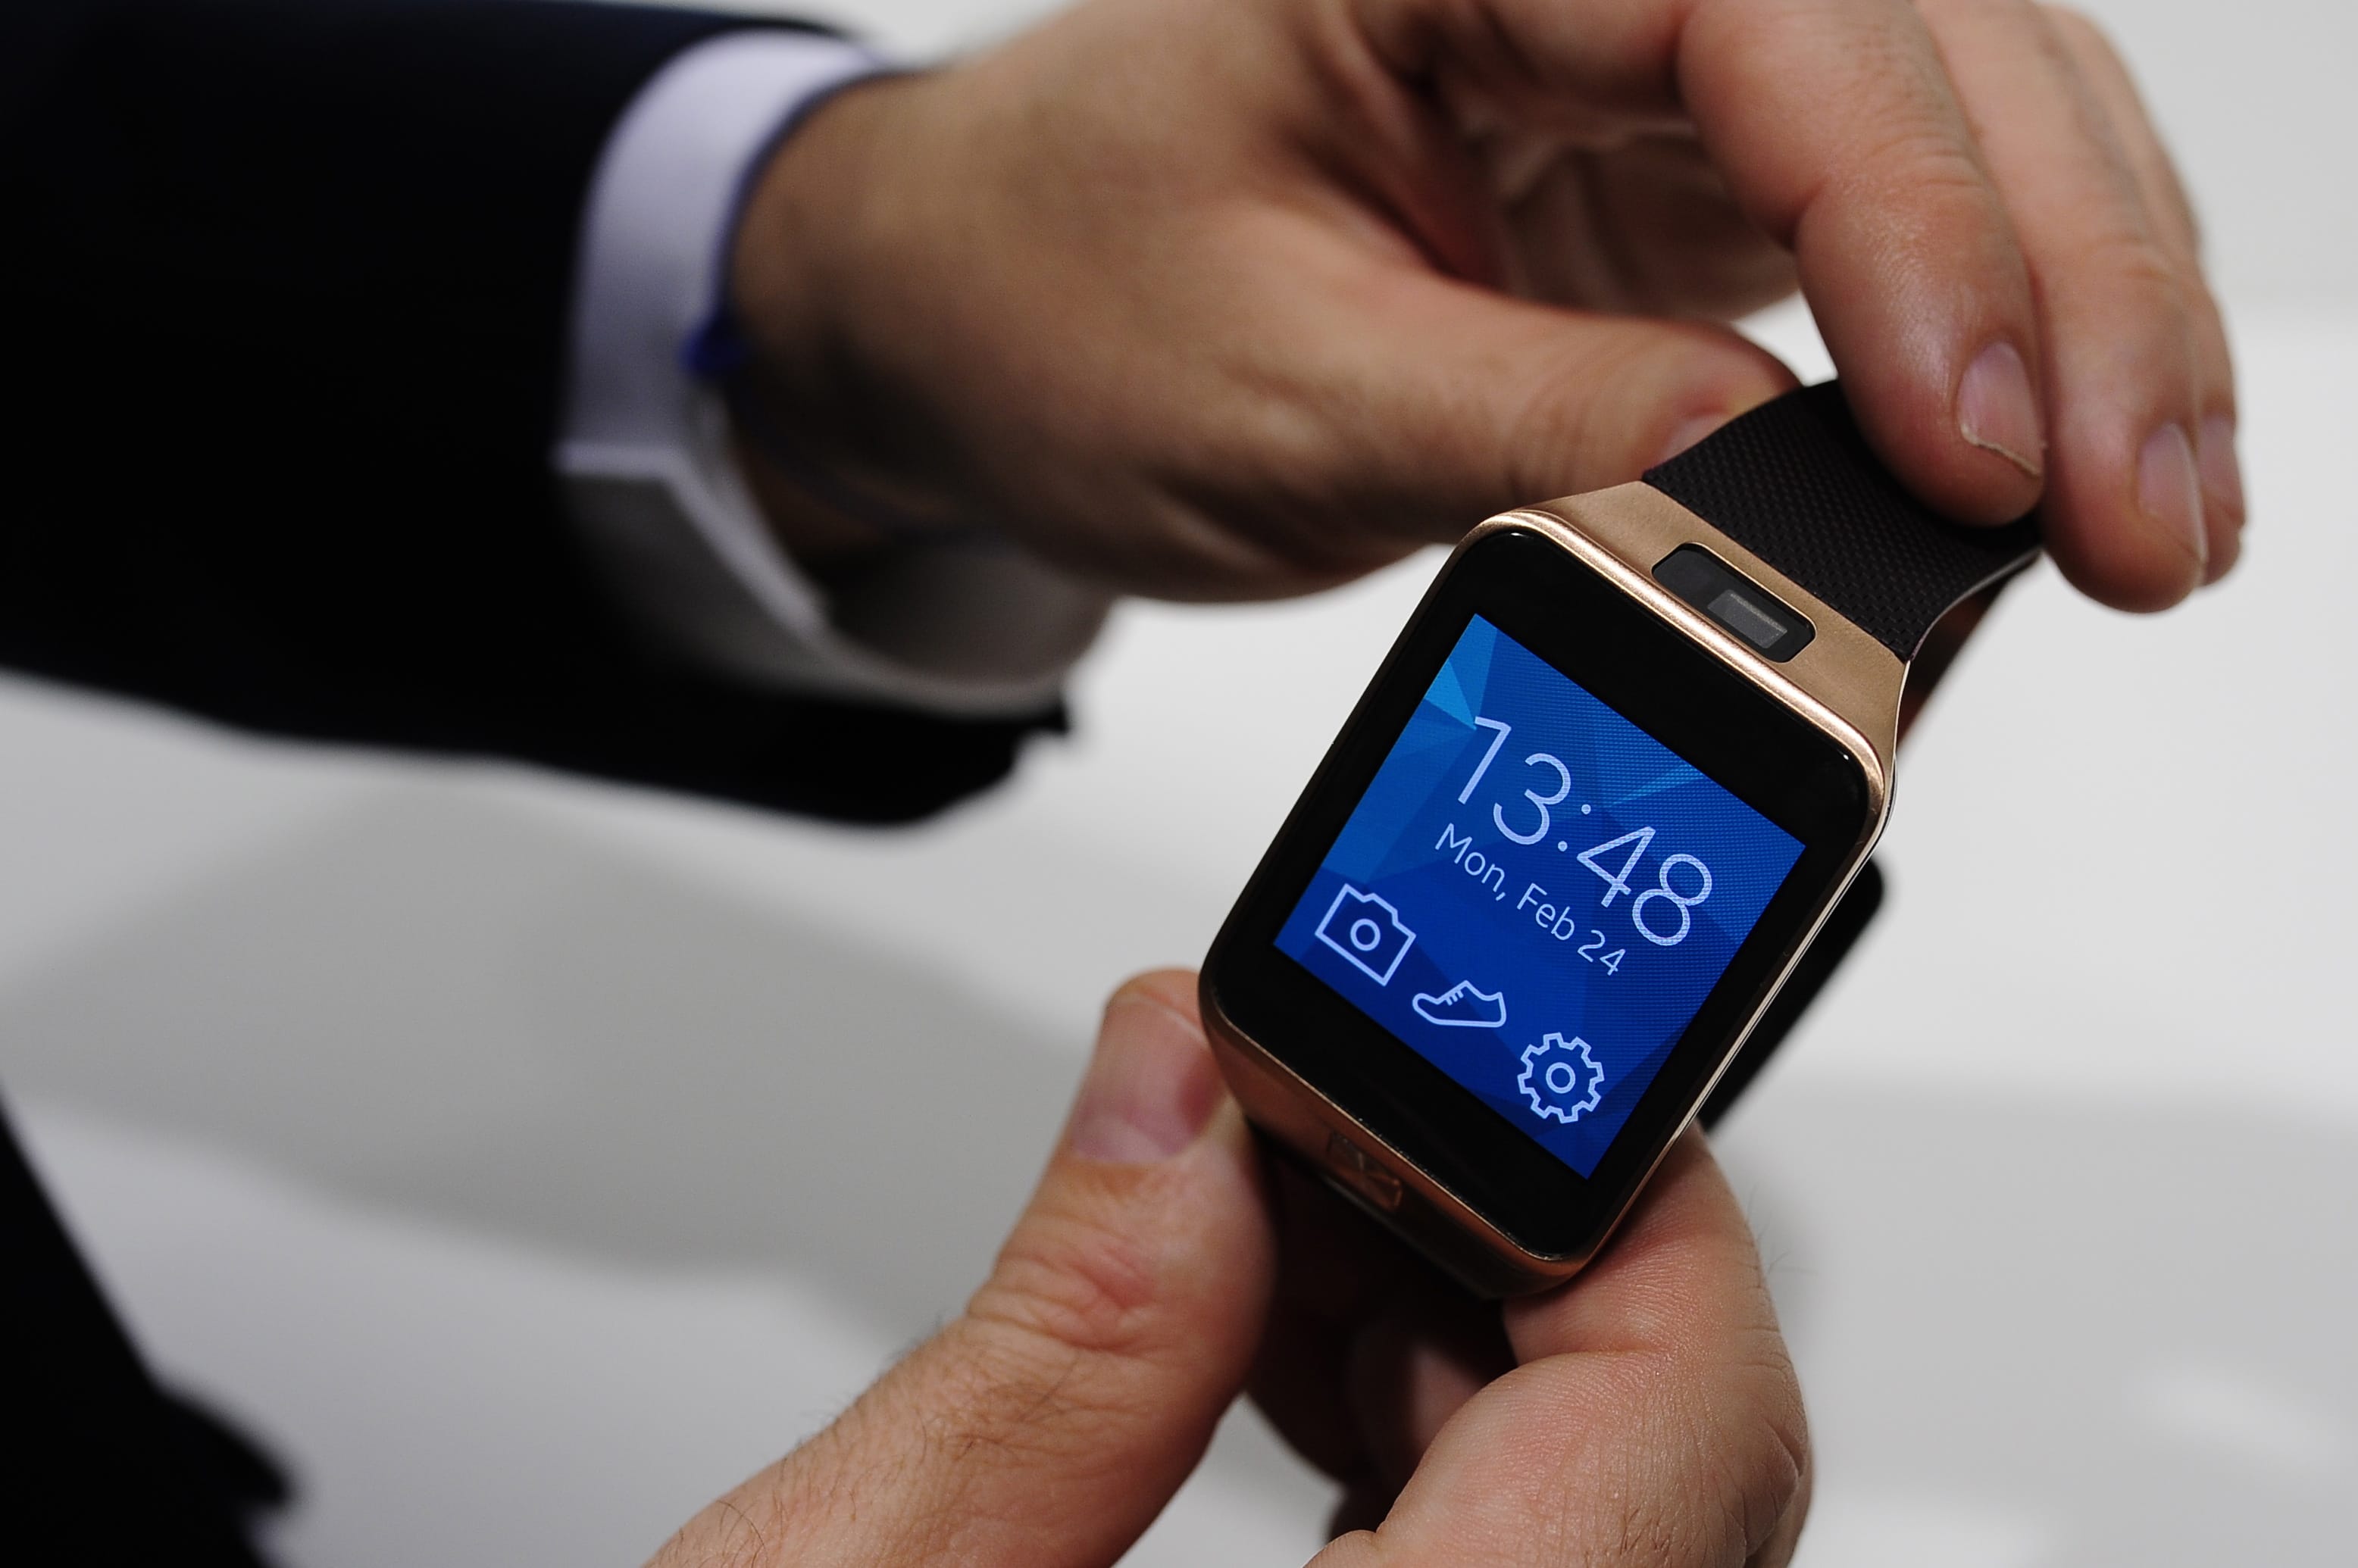 Samsung's latest gadgets, the Galaxy S5 smartphone, Gear Fit wristband and Gear 2 (shown) and Gear 2 Neo wristwatches, try to tap into people's passion for tracking fitness activities.